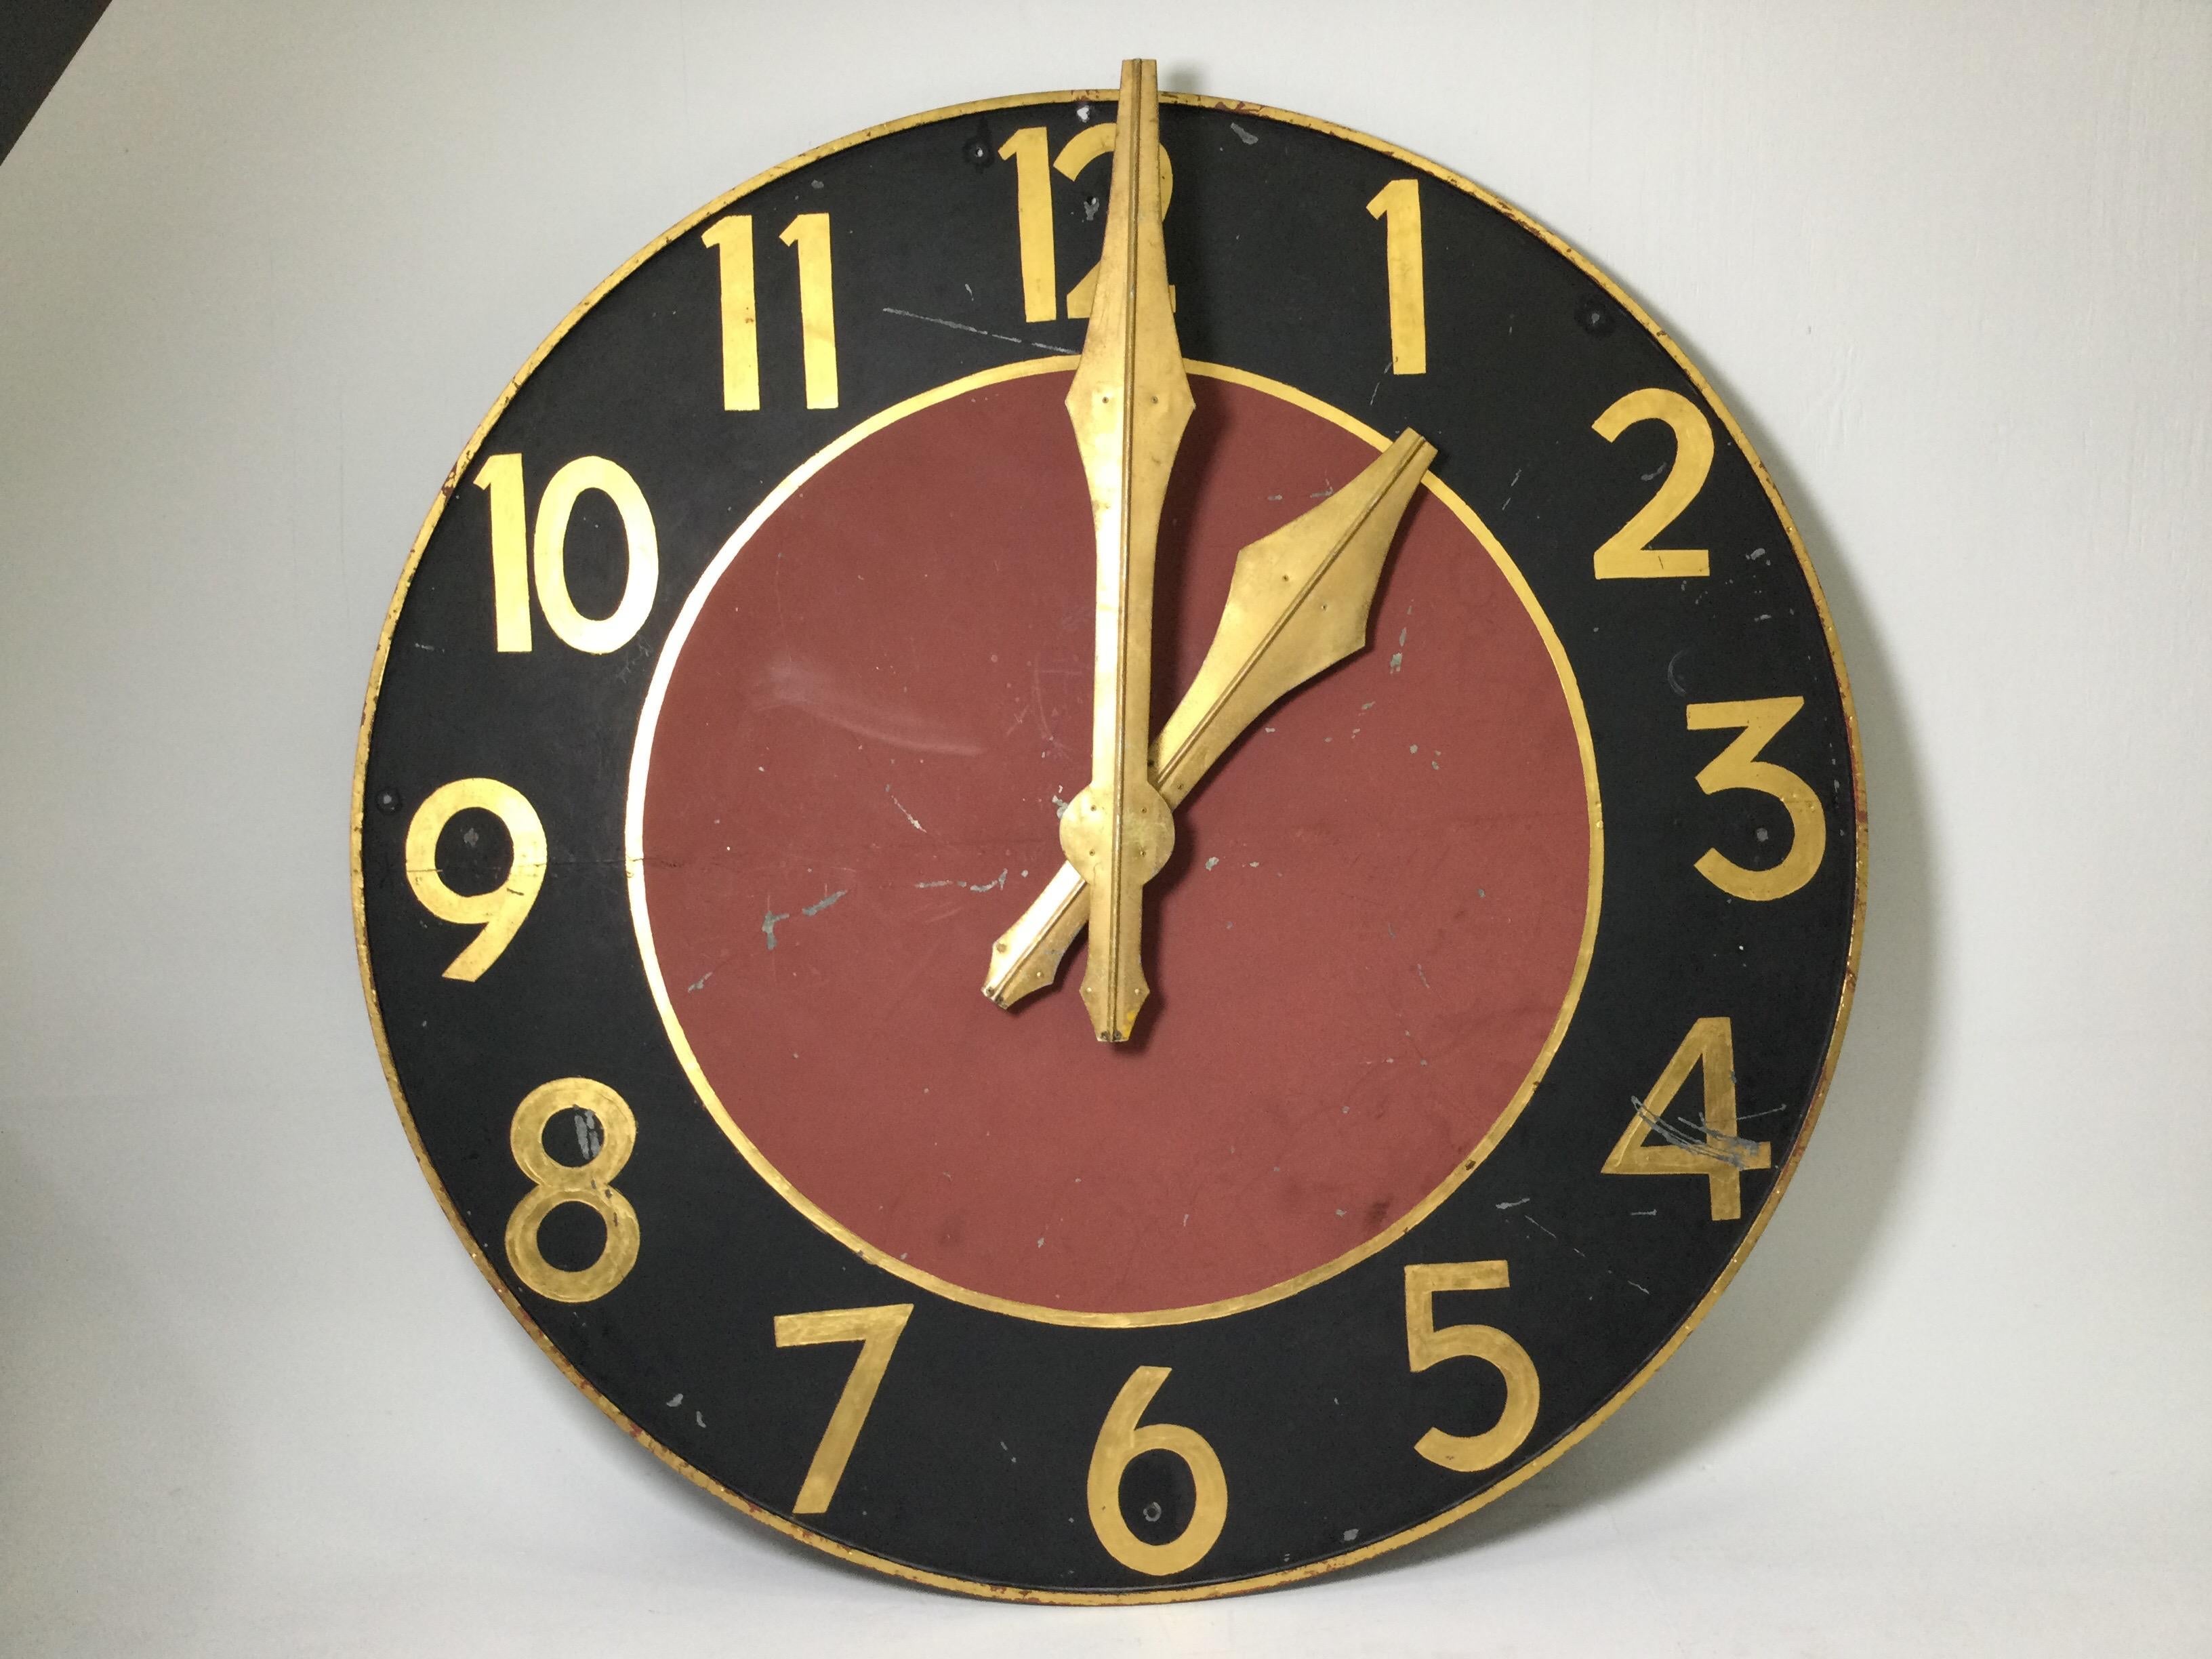 A large 72 inch diameter acretectual clock face in painted and gilt steel. The clock is for decorative purposes and is not running. Vey sturdy and heavy.